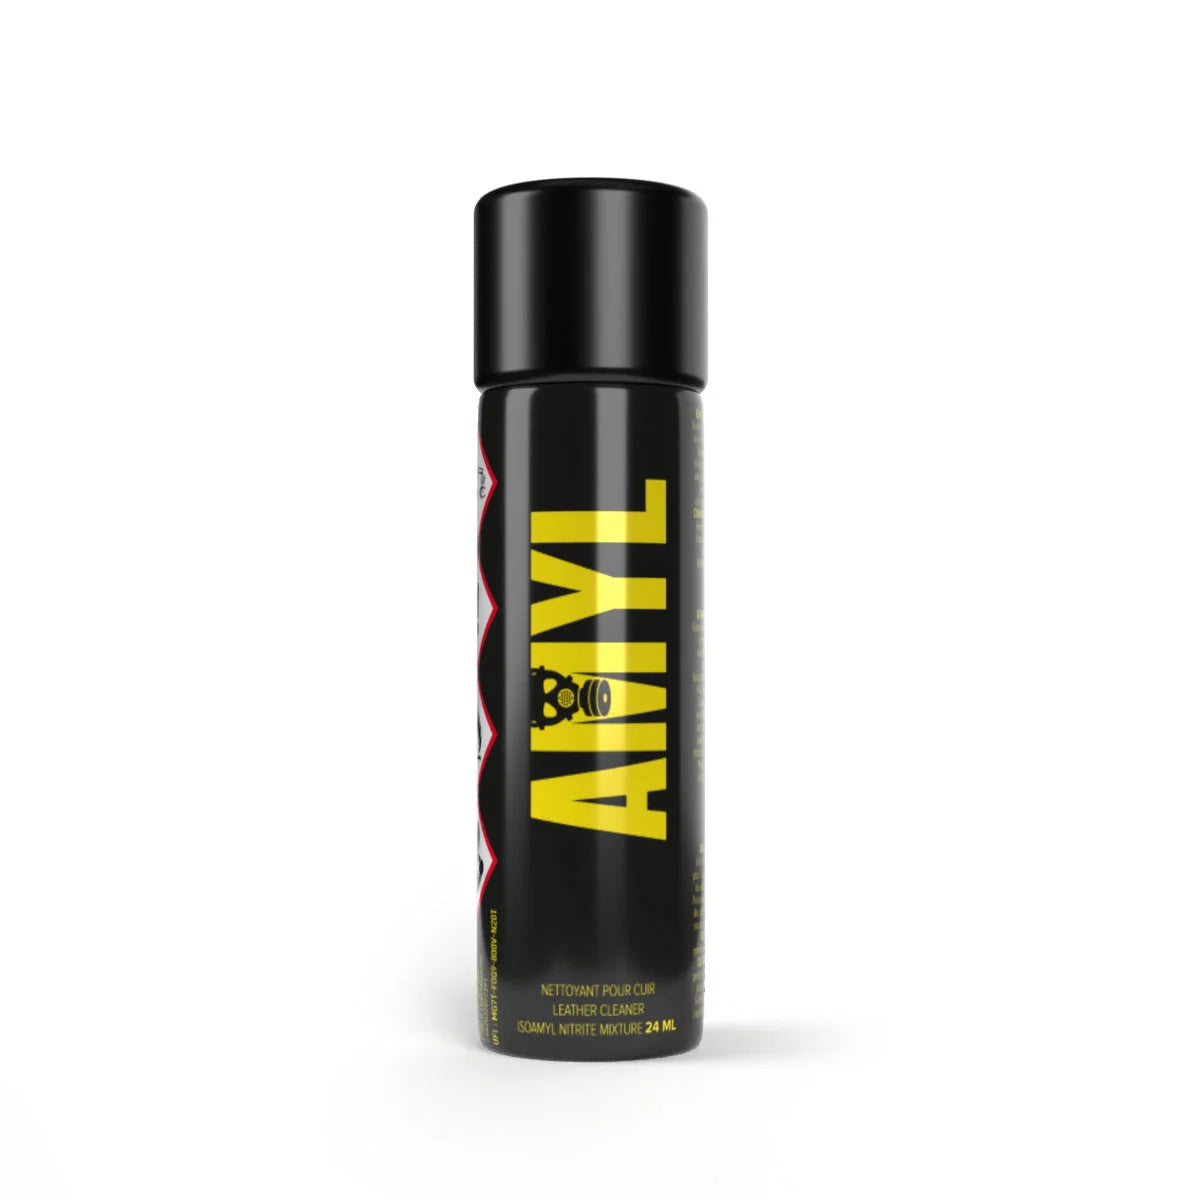 A product photo of a bottle of Amyl Slim poppers.